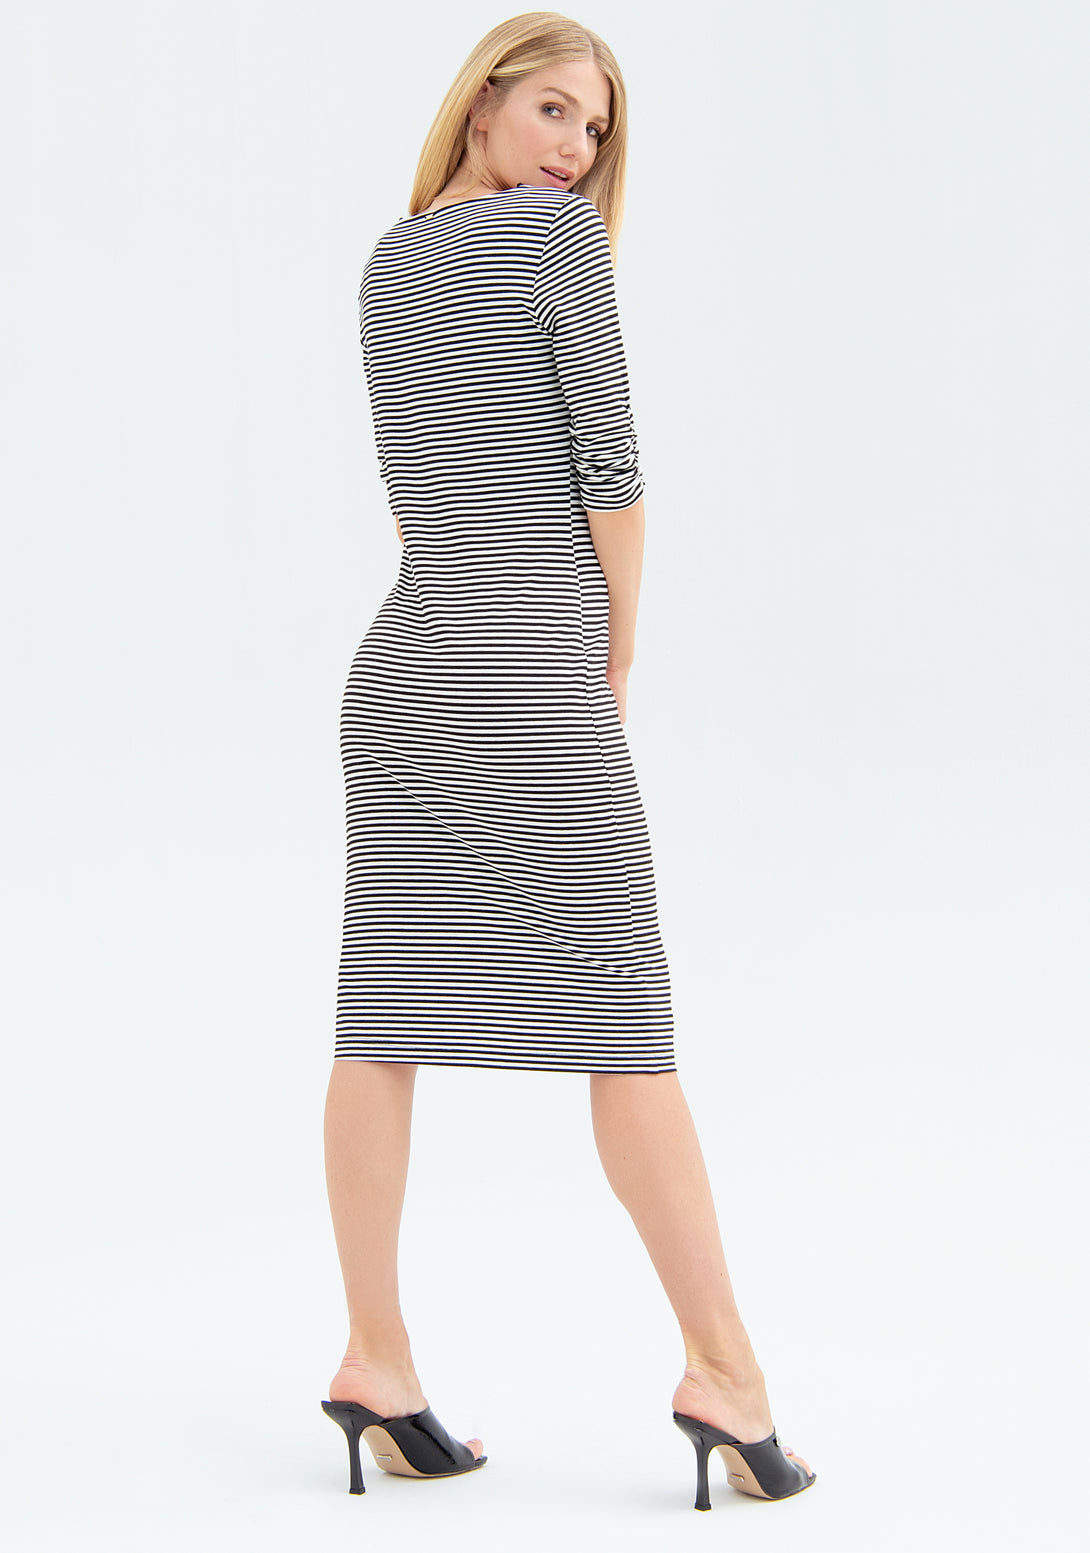 Dress tight fit, middle length, made in striped jersey